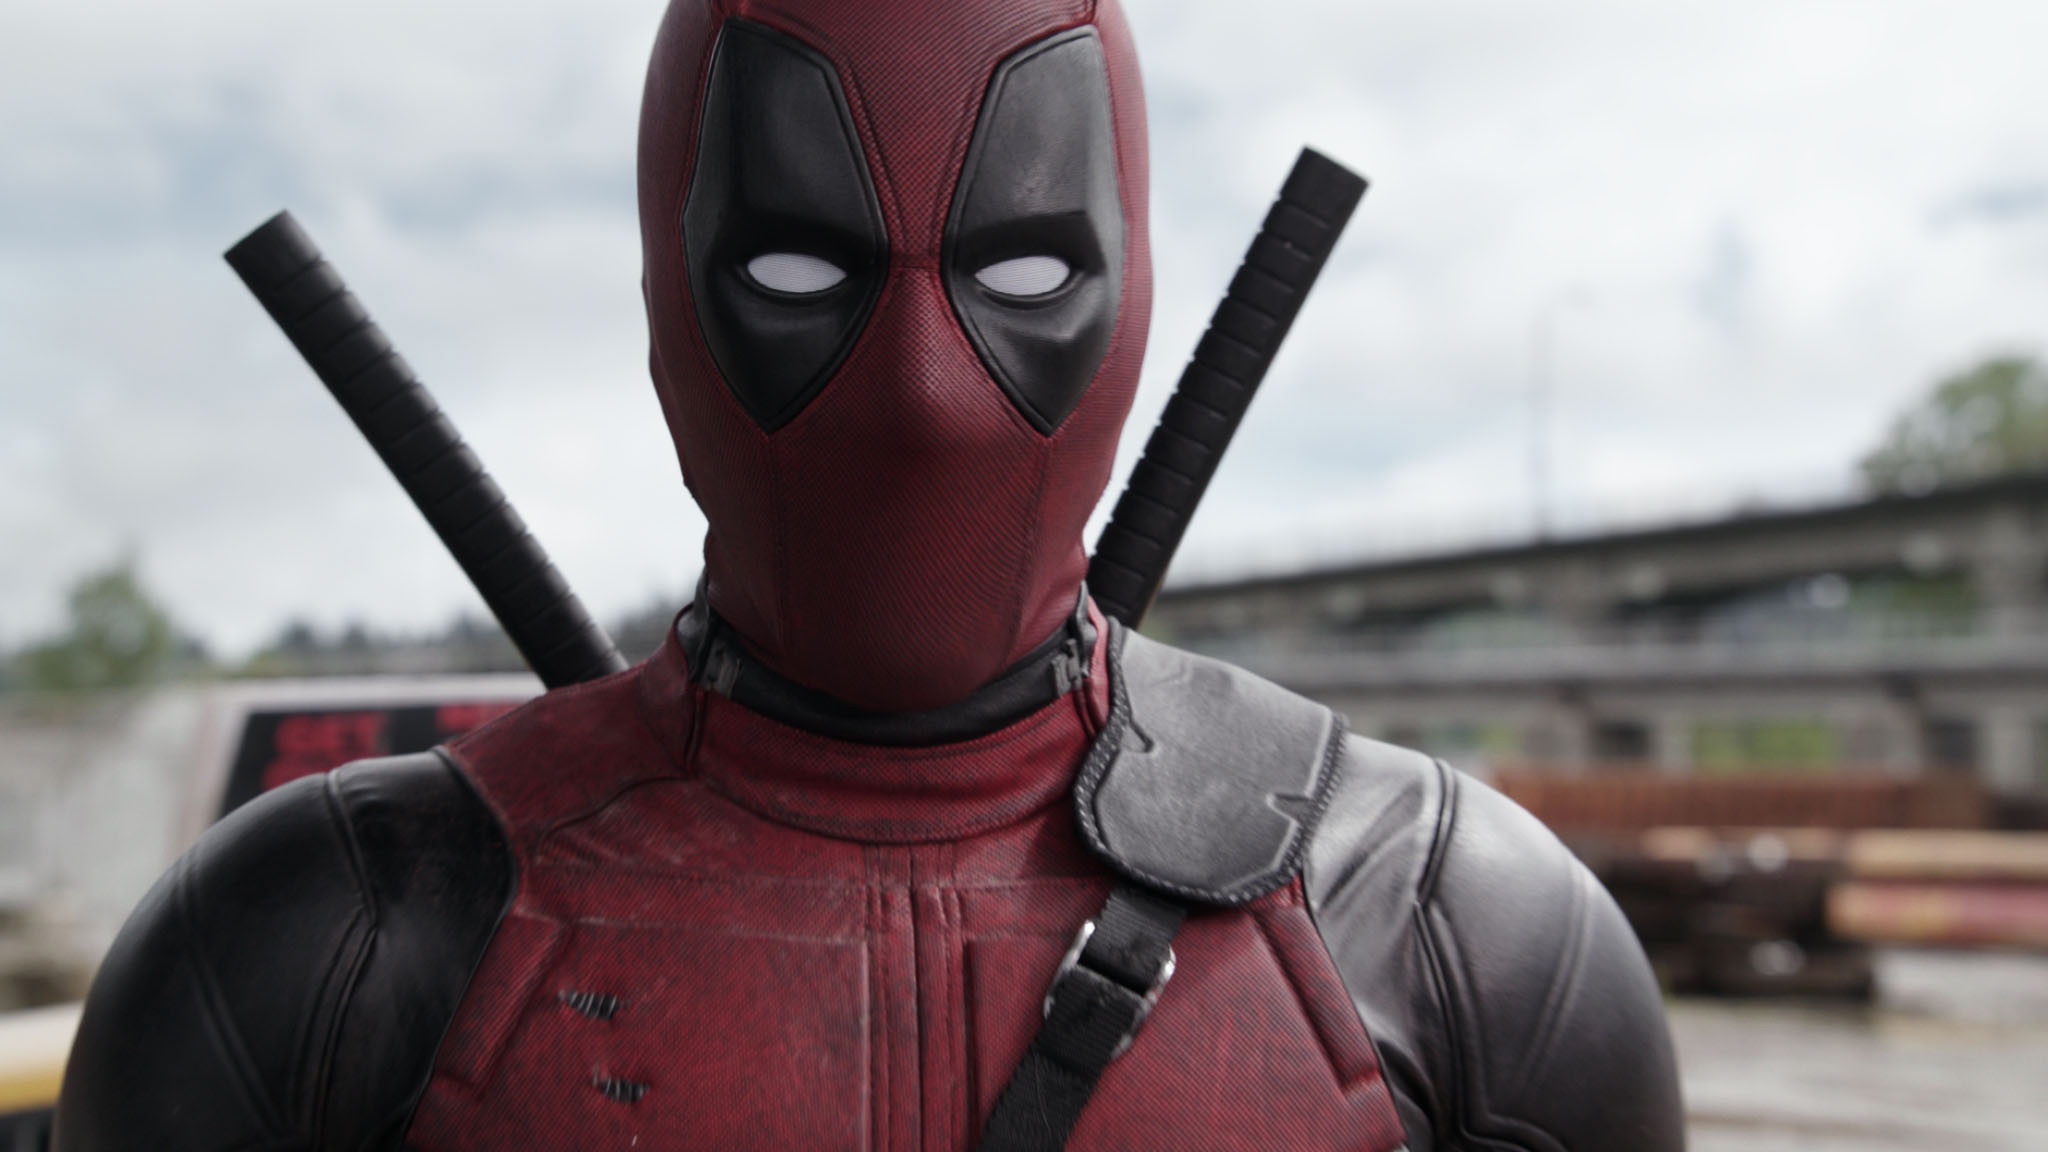 Deadpool 3 star Ryan Reynolds has asked outlets to stop sharing spoiler images online for the movie.